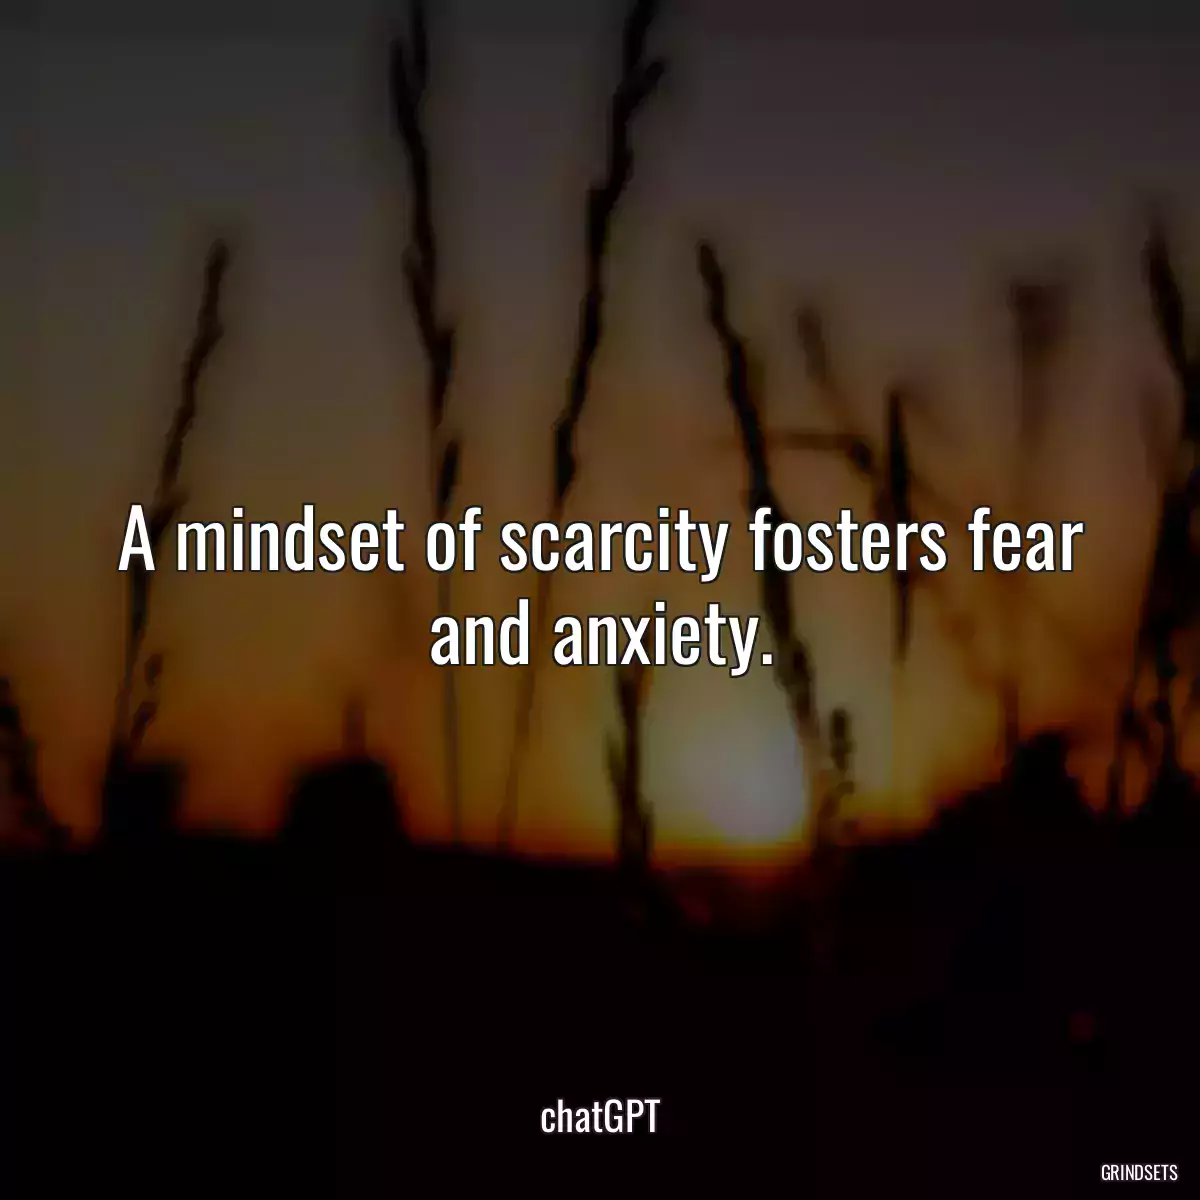 A mindset of scarcity fosters fear and anxiety.